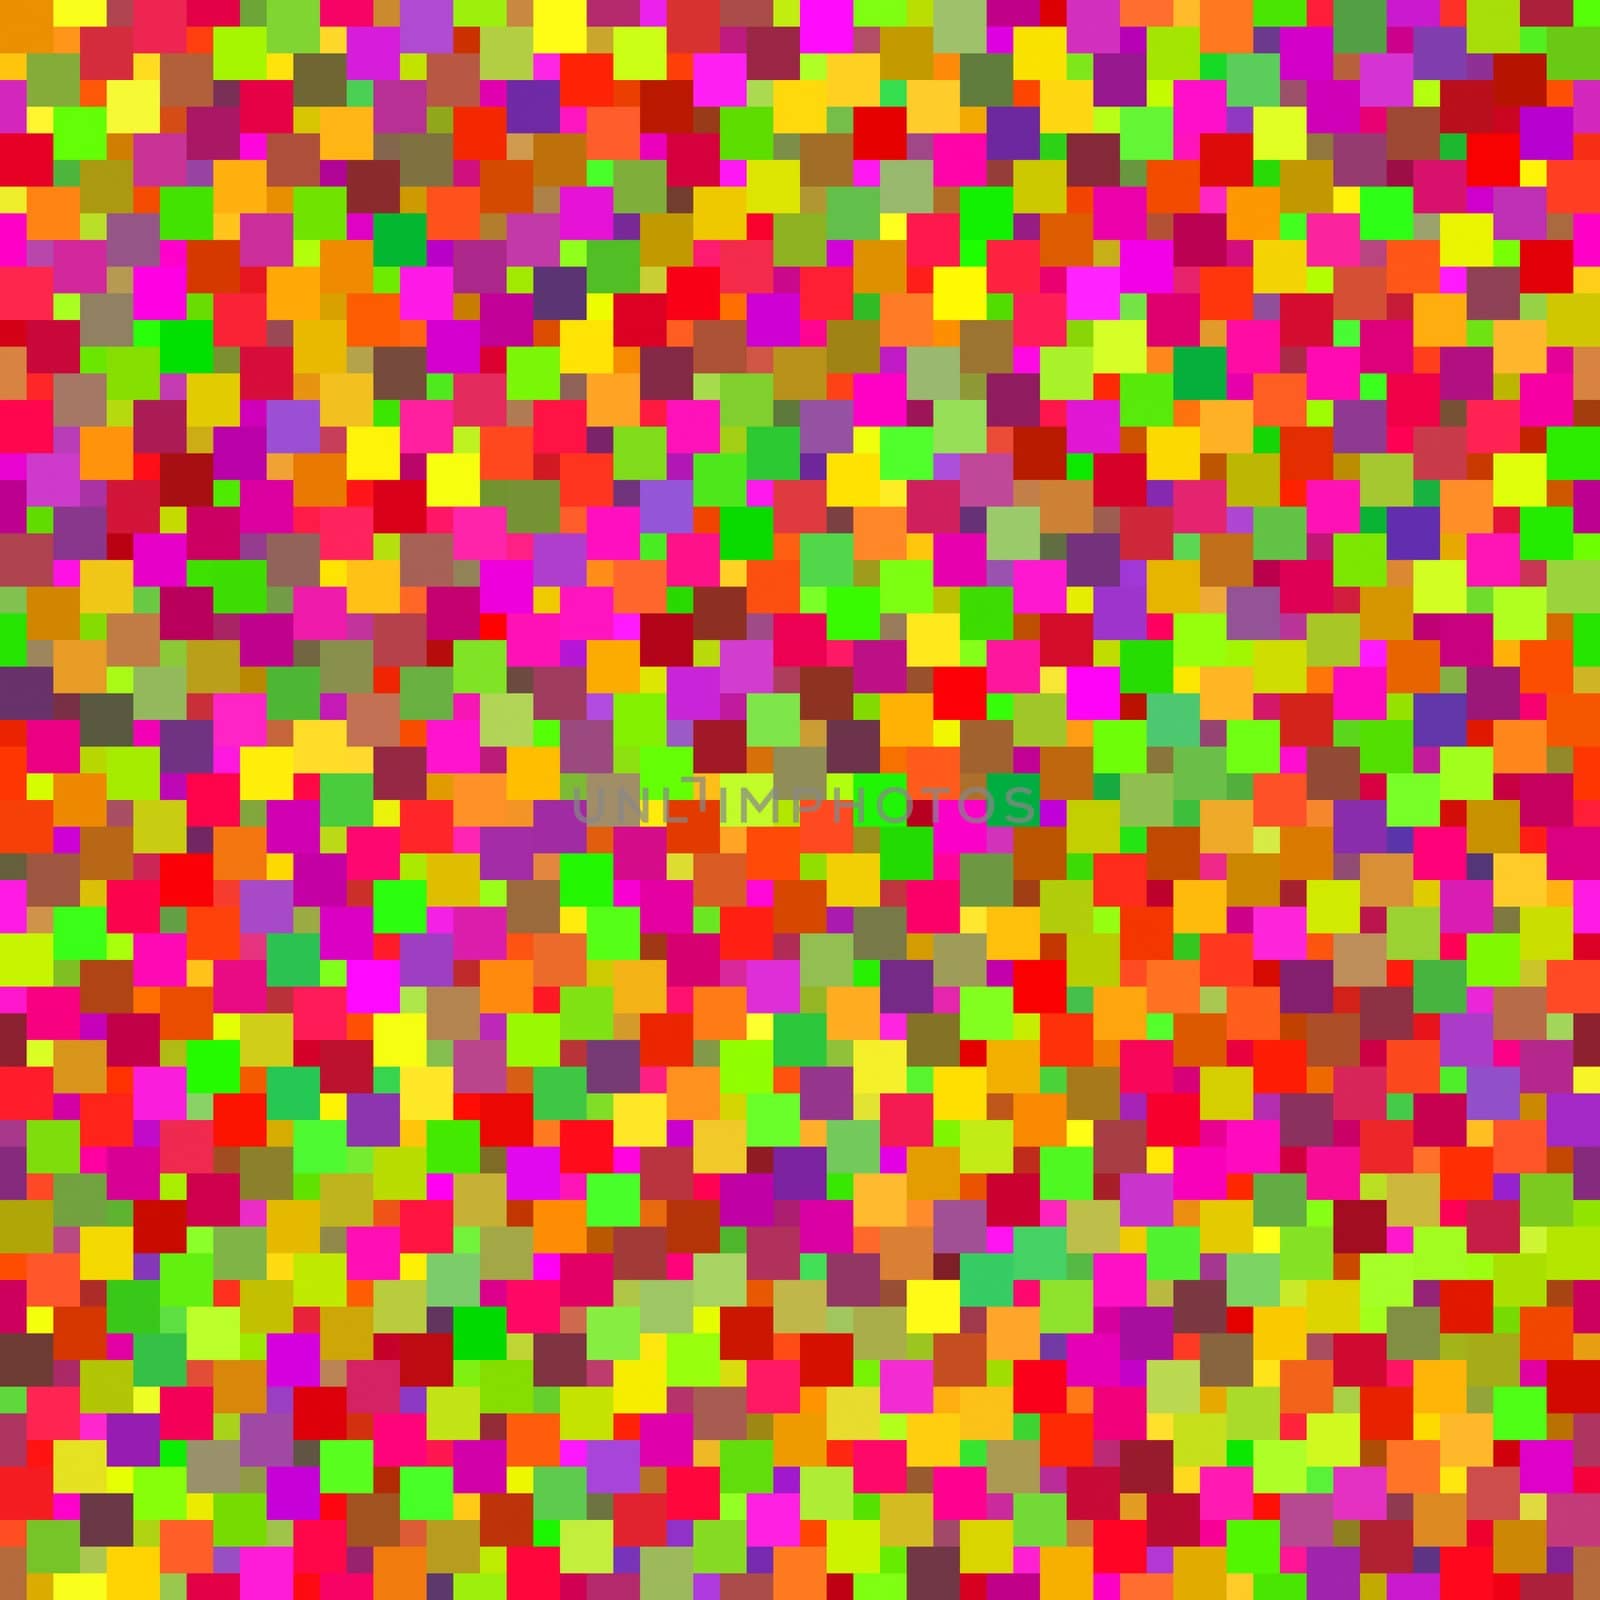 seamless texture of many small bright colored squares